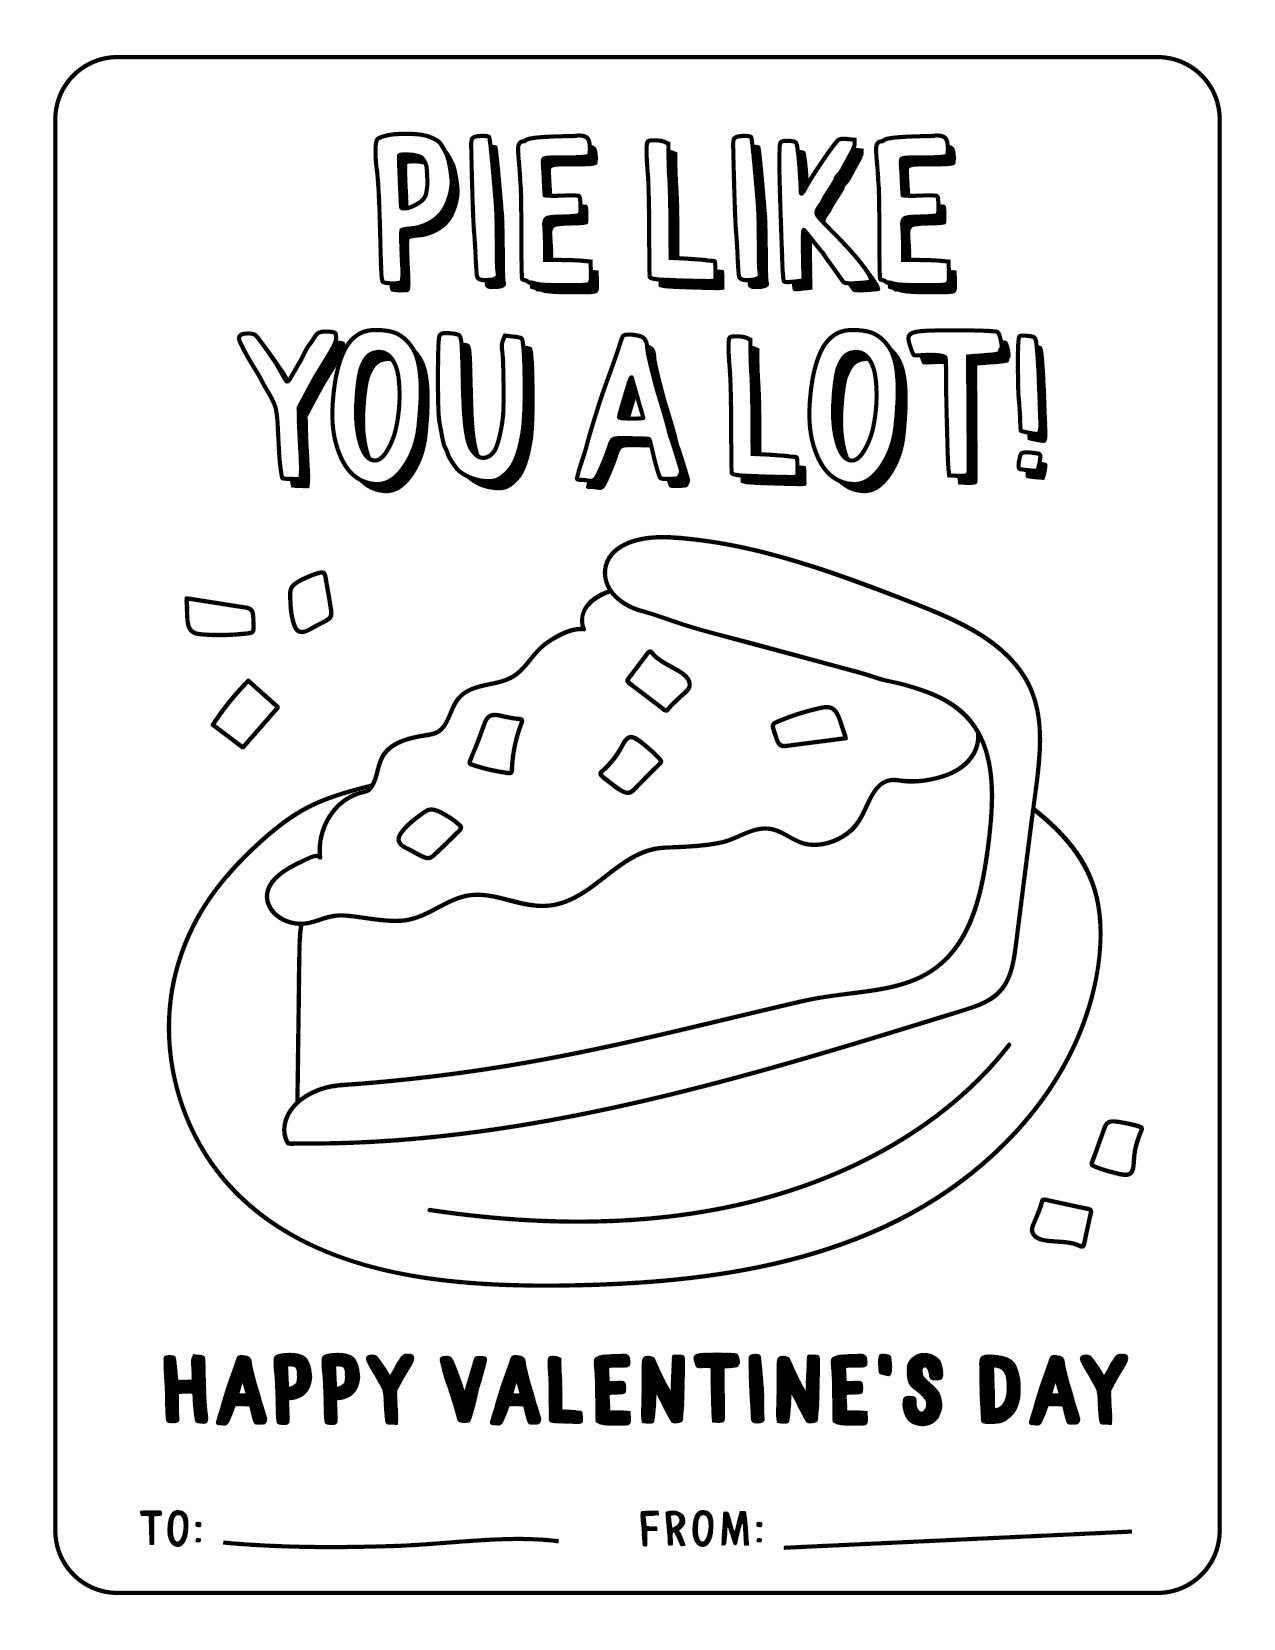 Vday_Cards-01 (1).png